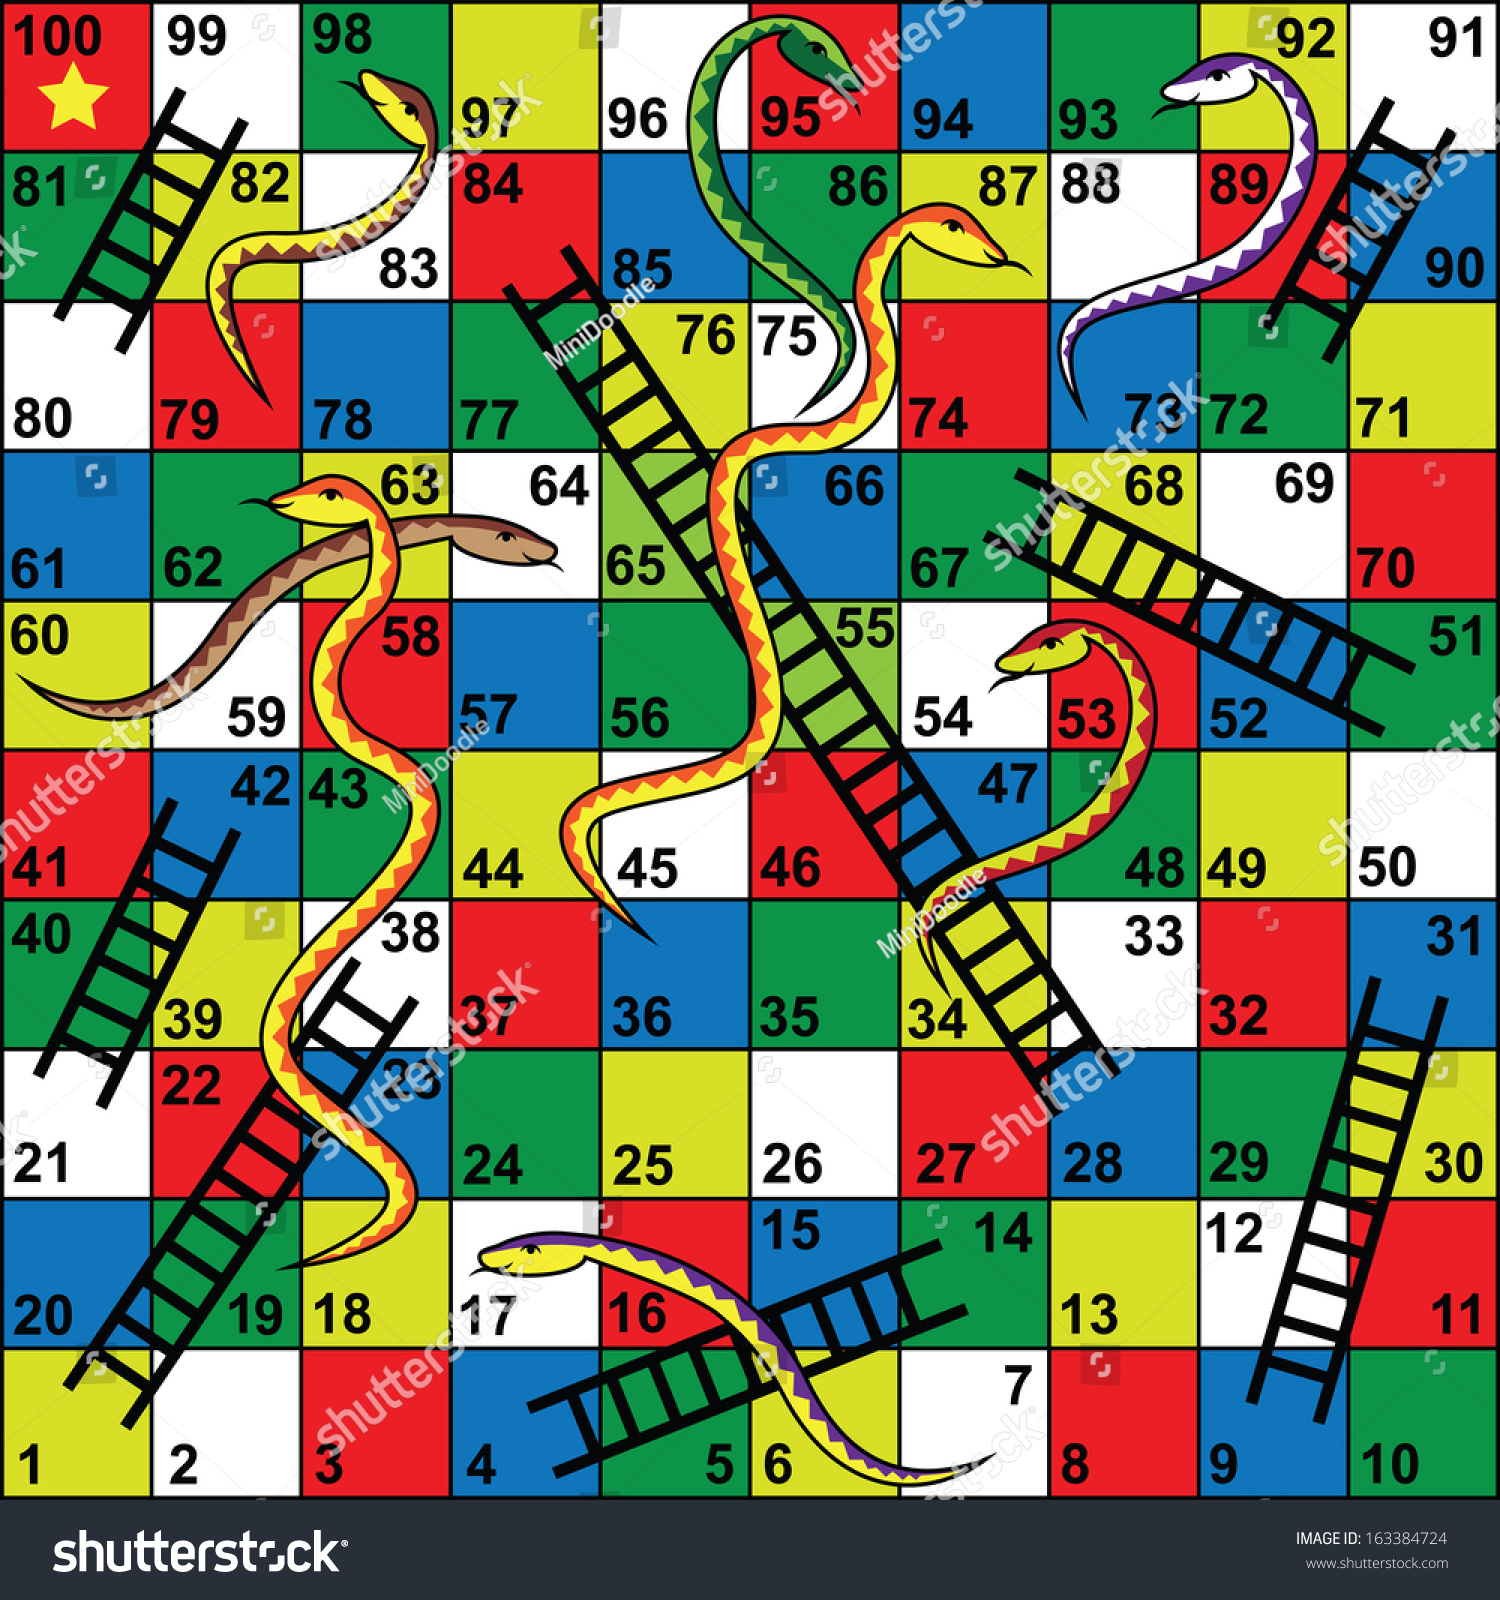 Snakes ladder ballcrusher instructions with free porn photo